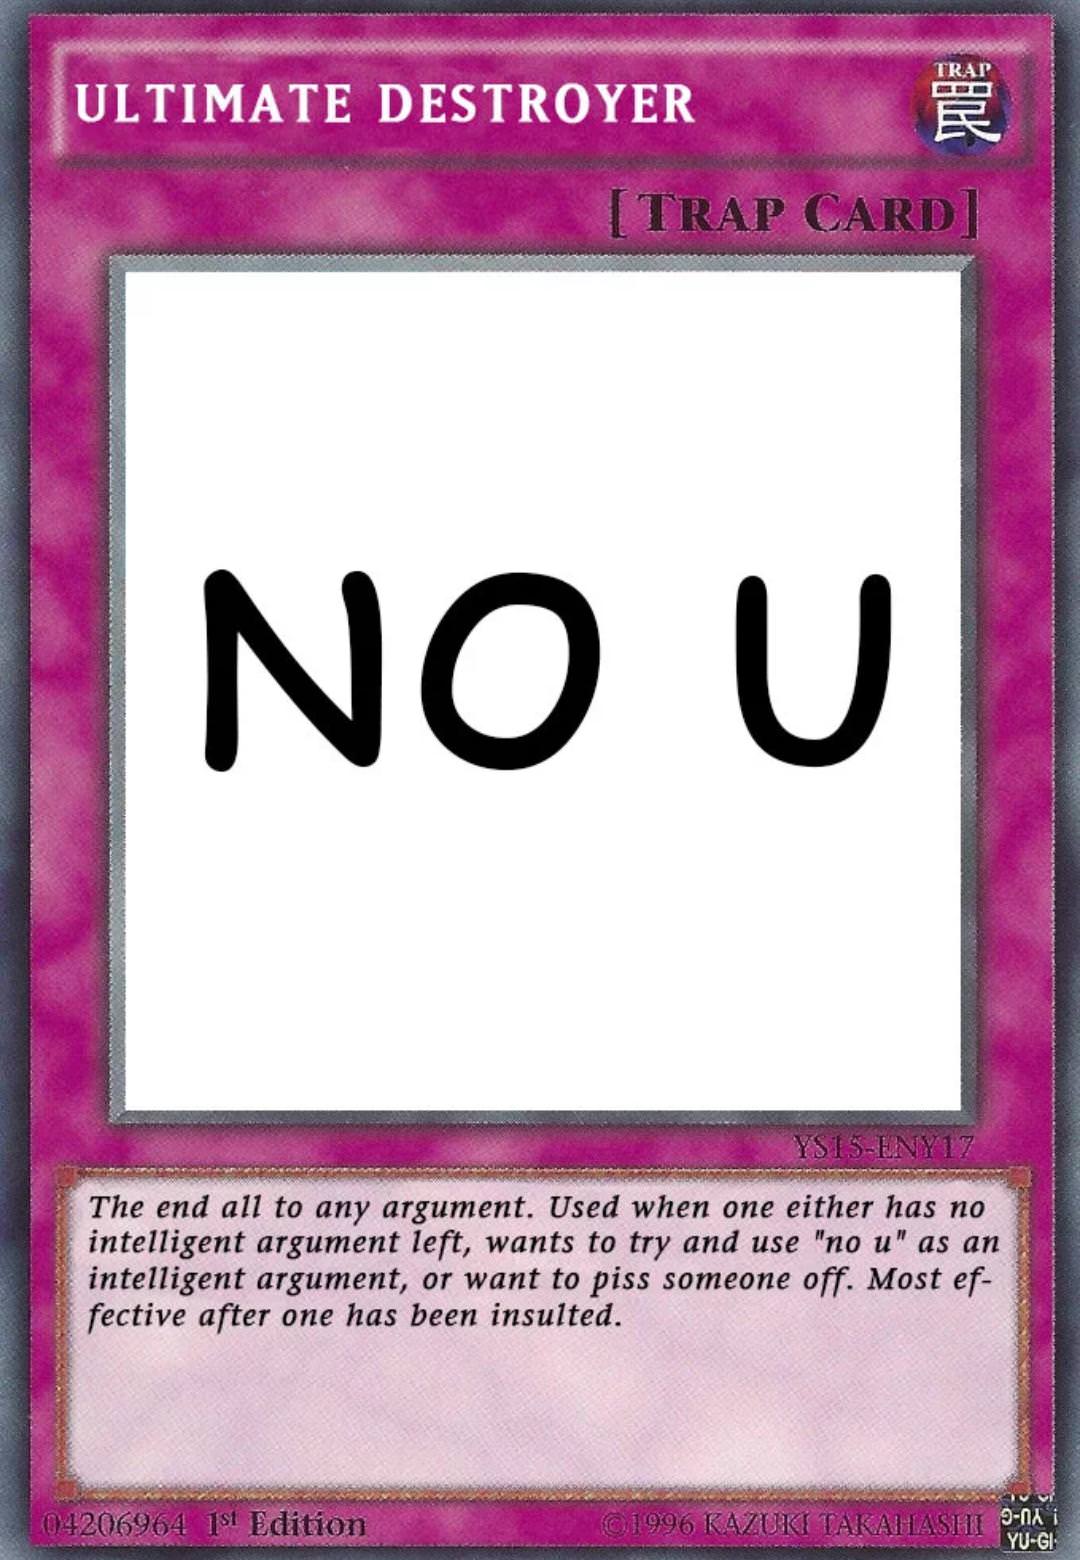 win an argument card - Trar Ultimate Destroyer | Trap Card No U YsisENY17. The end all to any argument. Used when one either has no intelligent argument left, wants to try and use "no u" as an intelligent argument, or want to piss someone off. Most ef fec